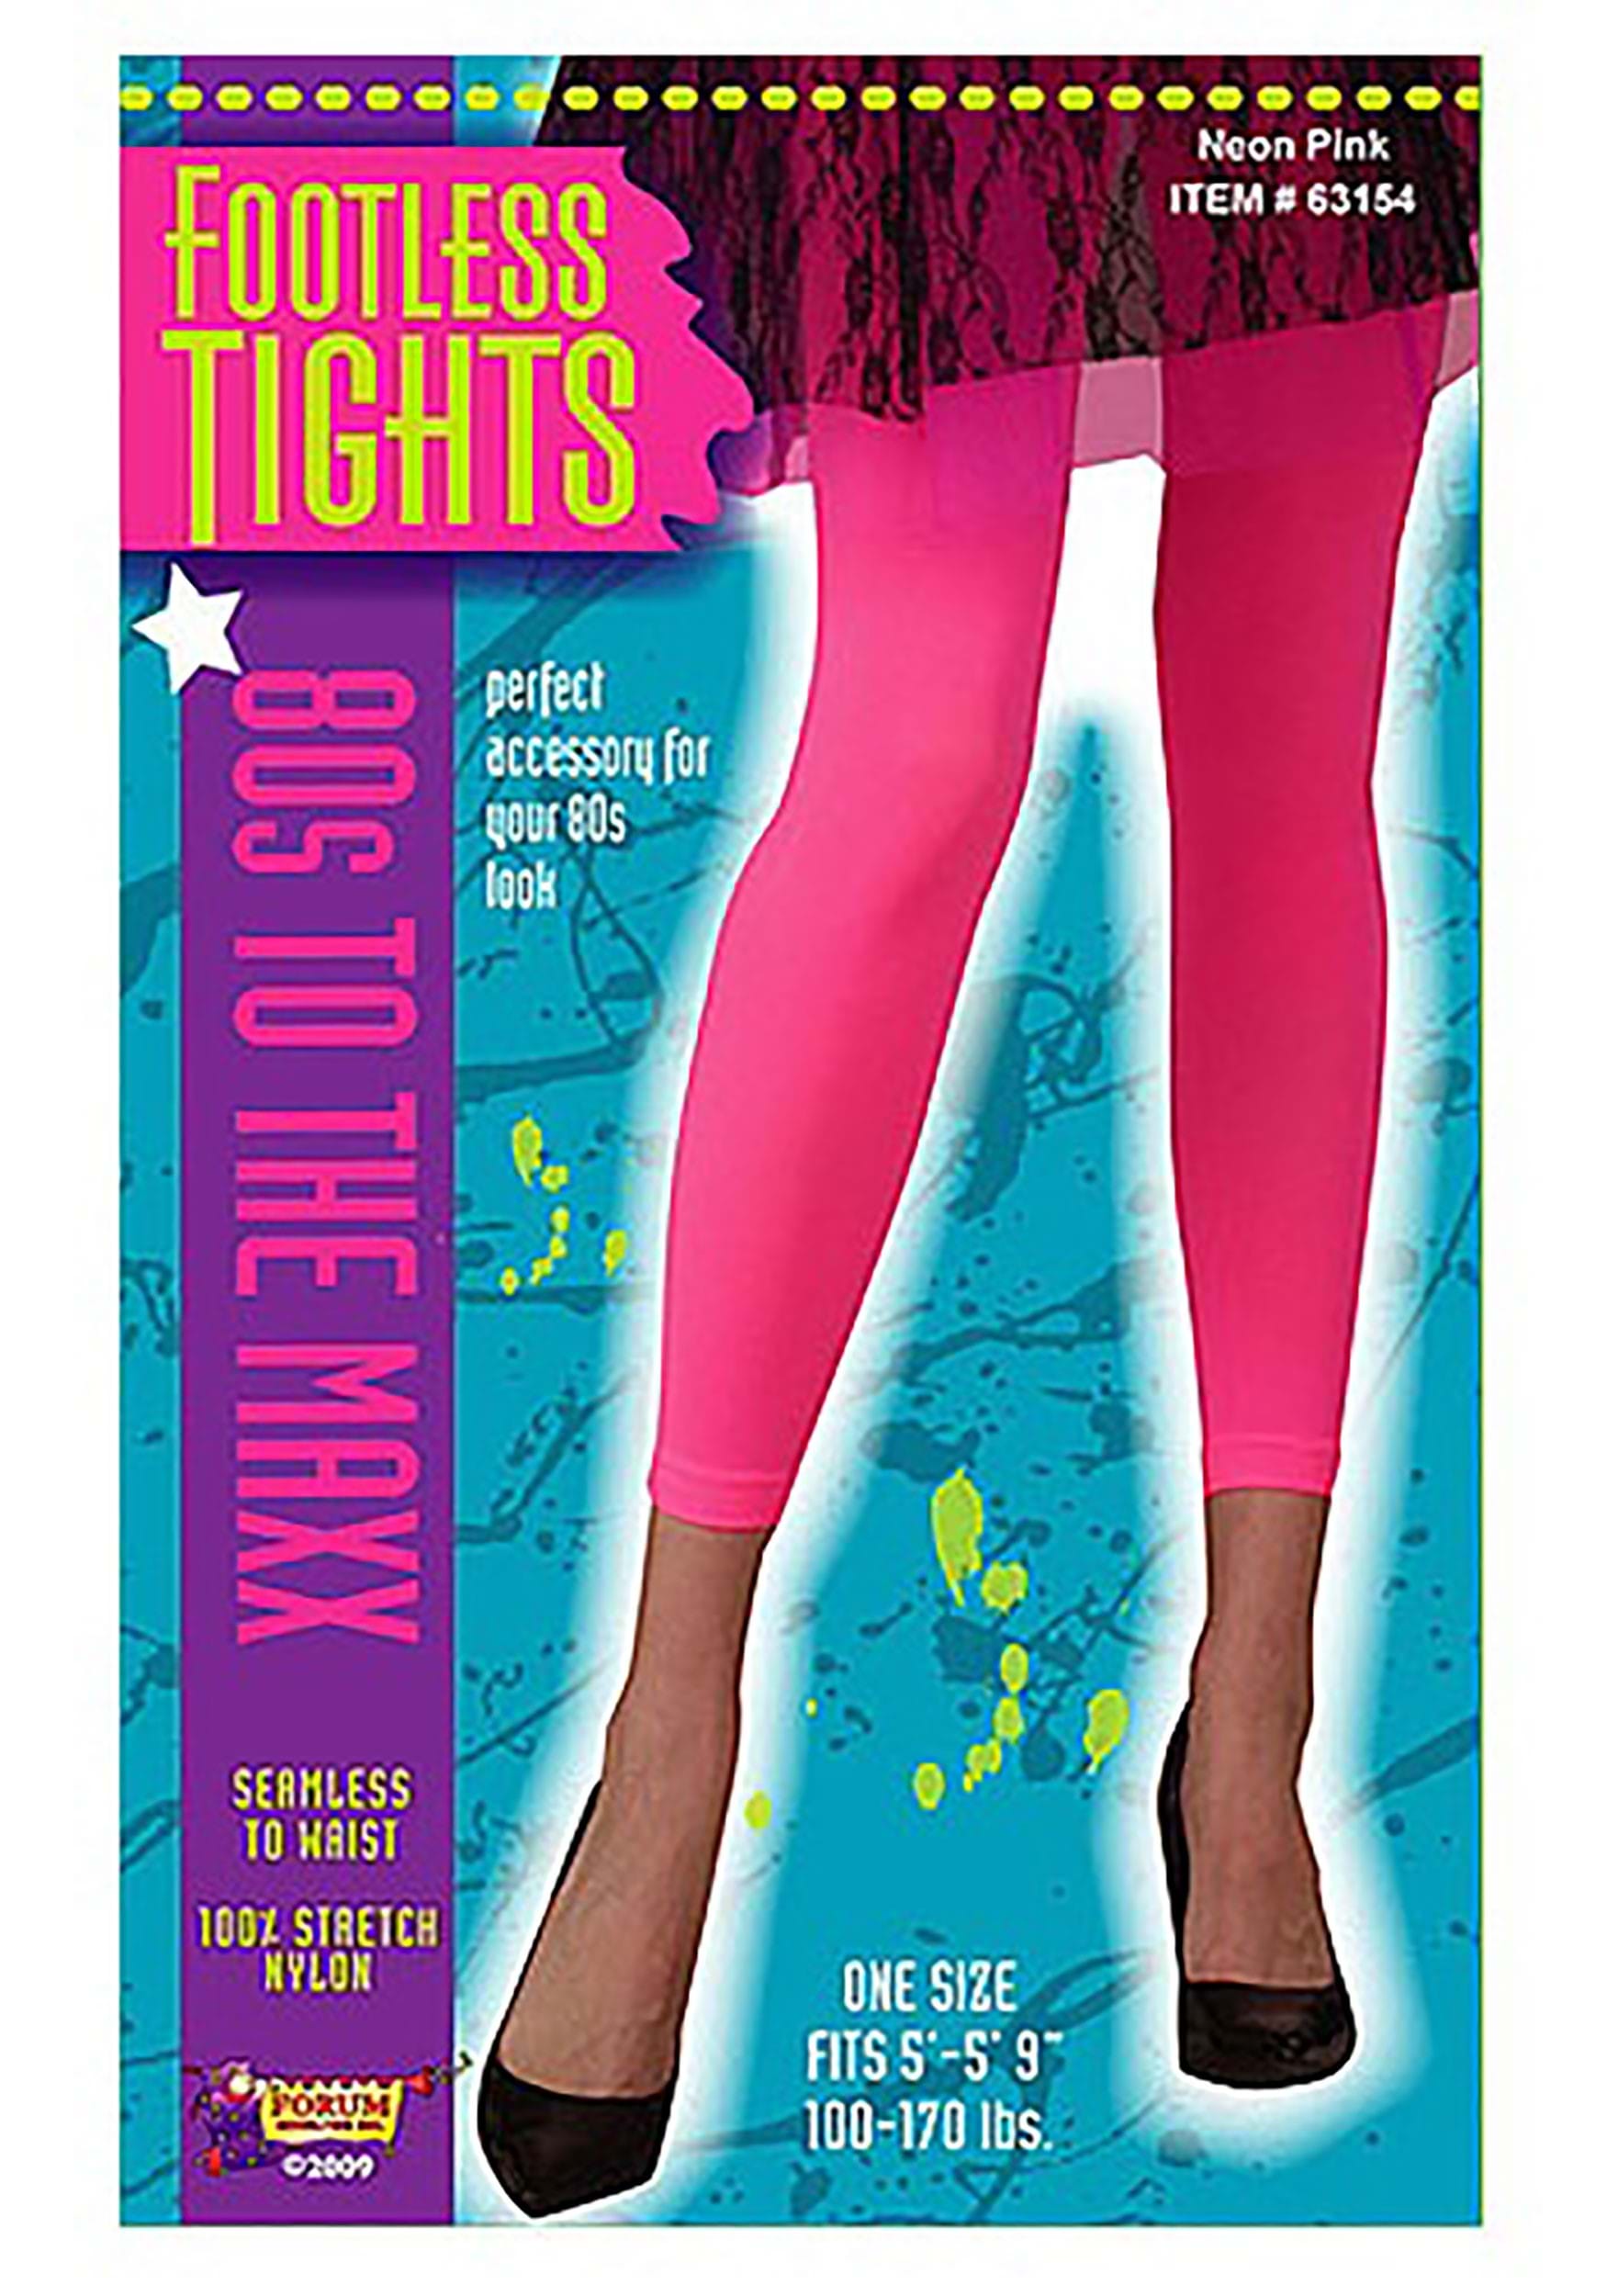 https://images.halloweencostumes.eu/products/3967/1-1/neon-pink-footless-tights.jpg